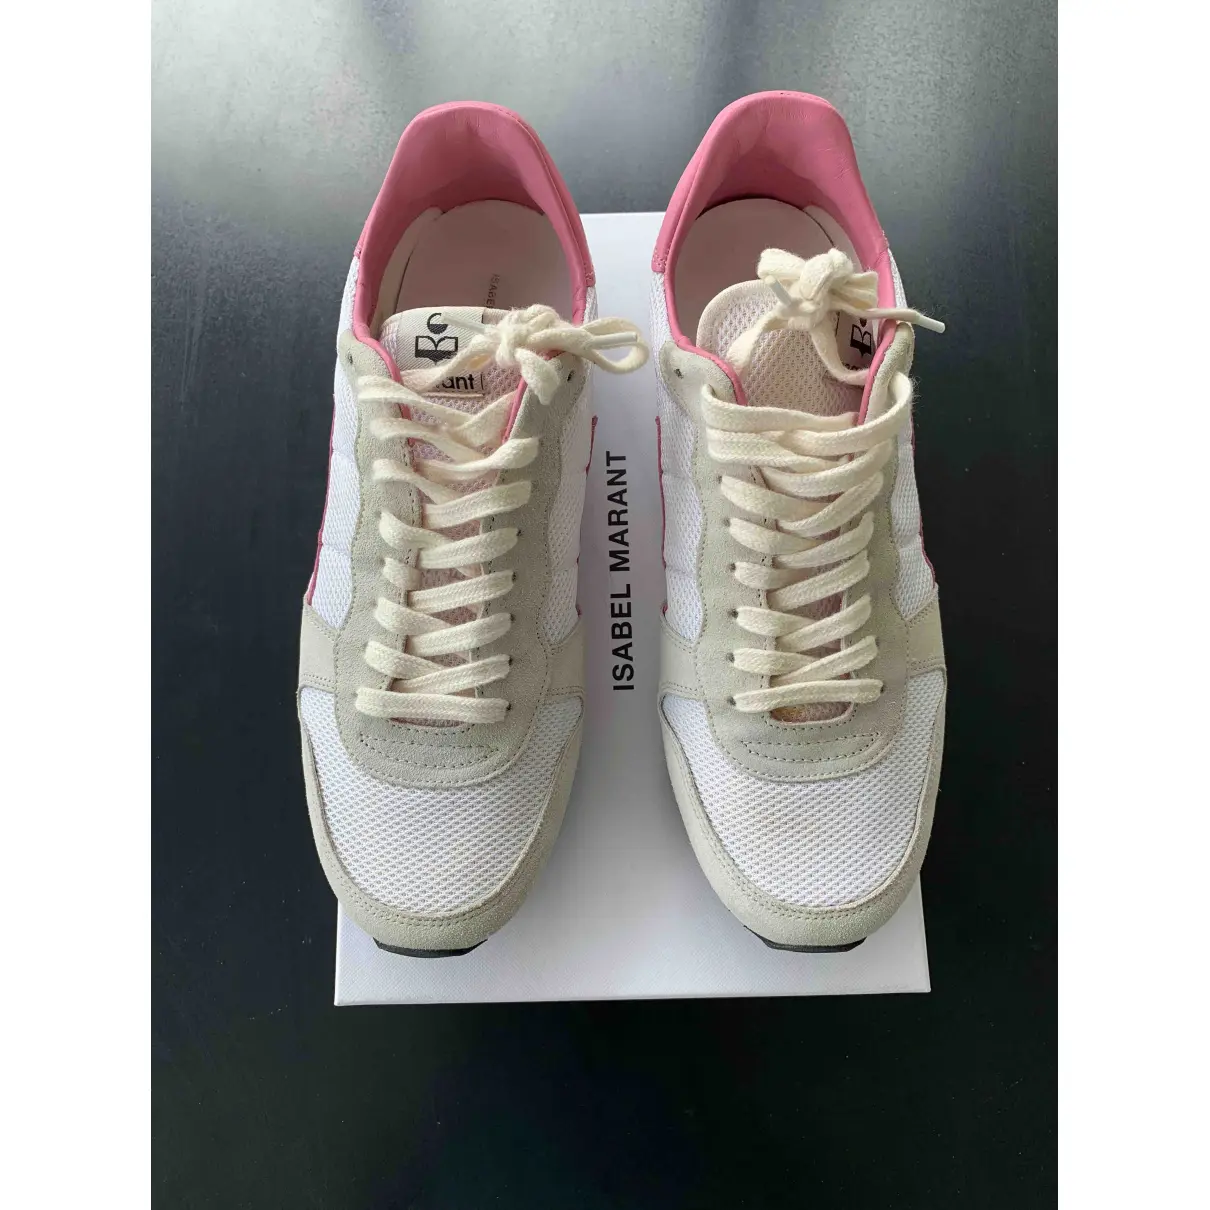 Buy Isabel Marant Cloth trainers online